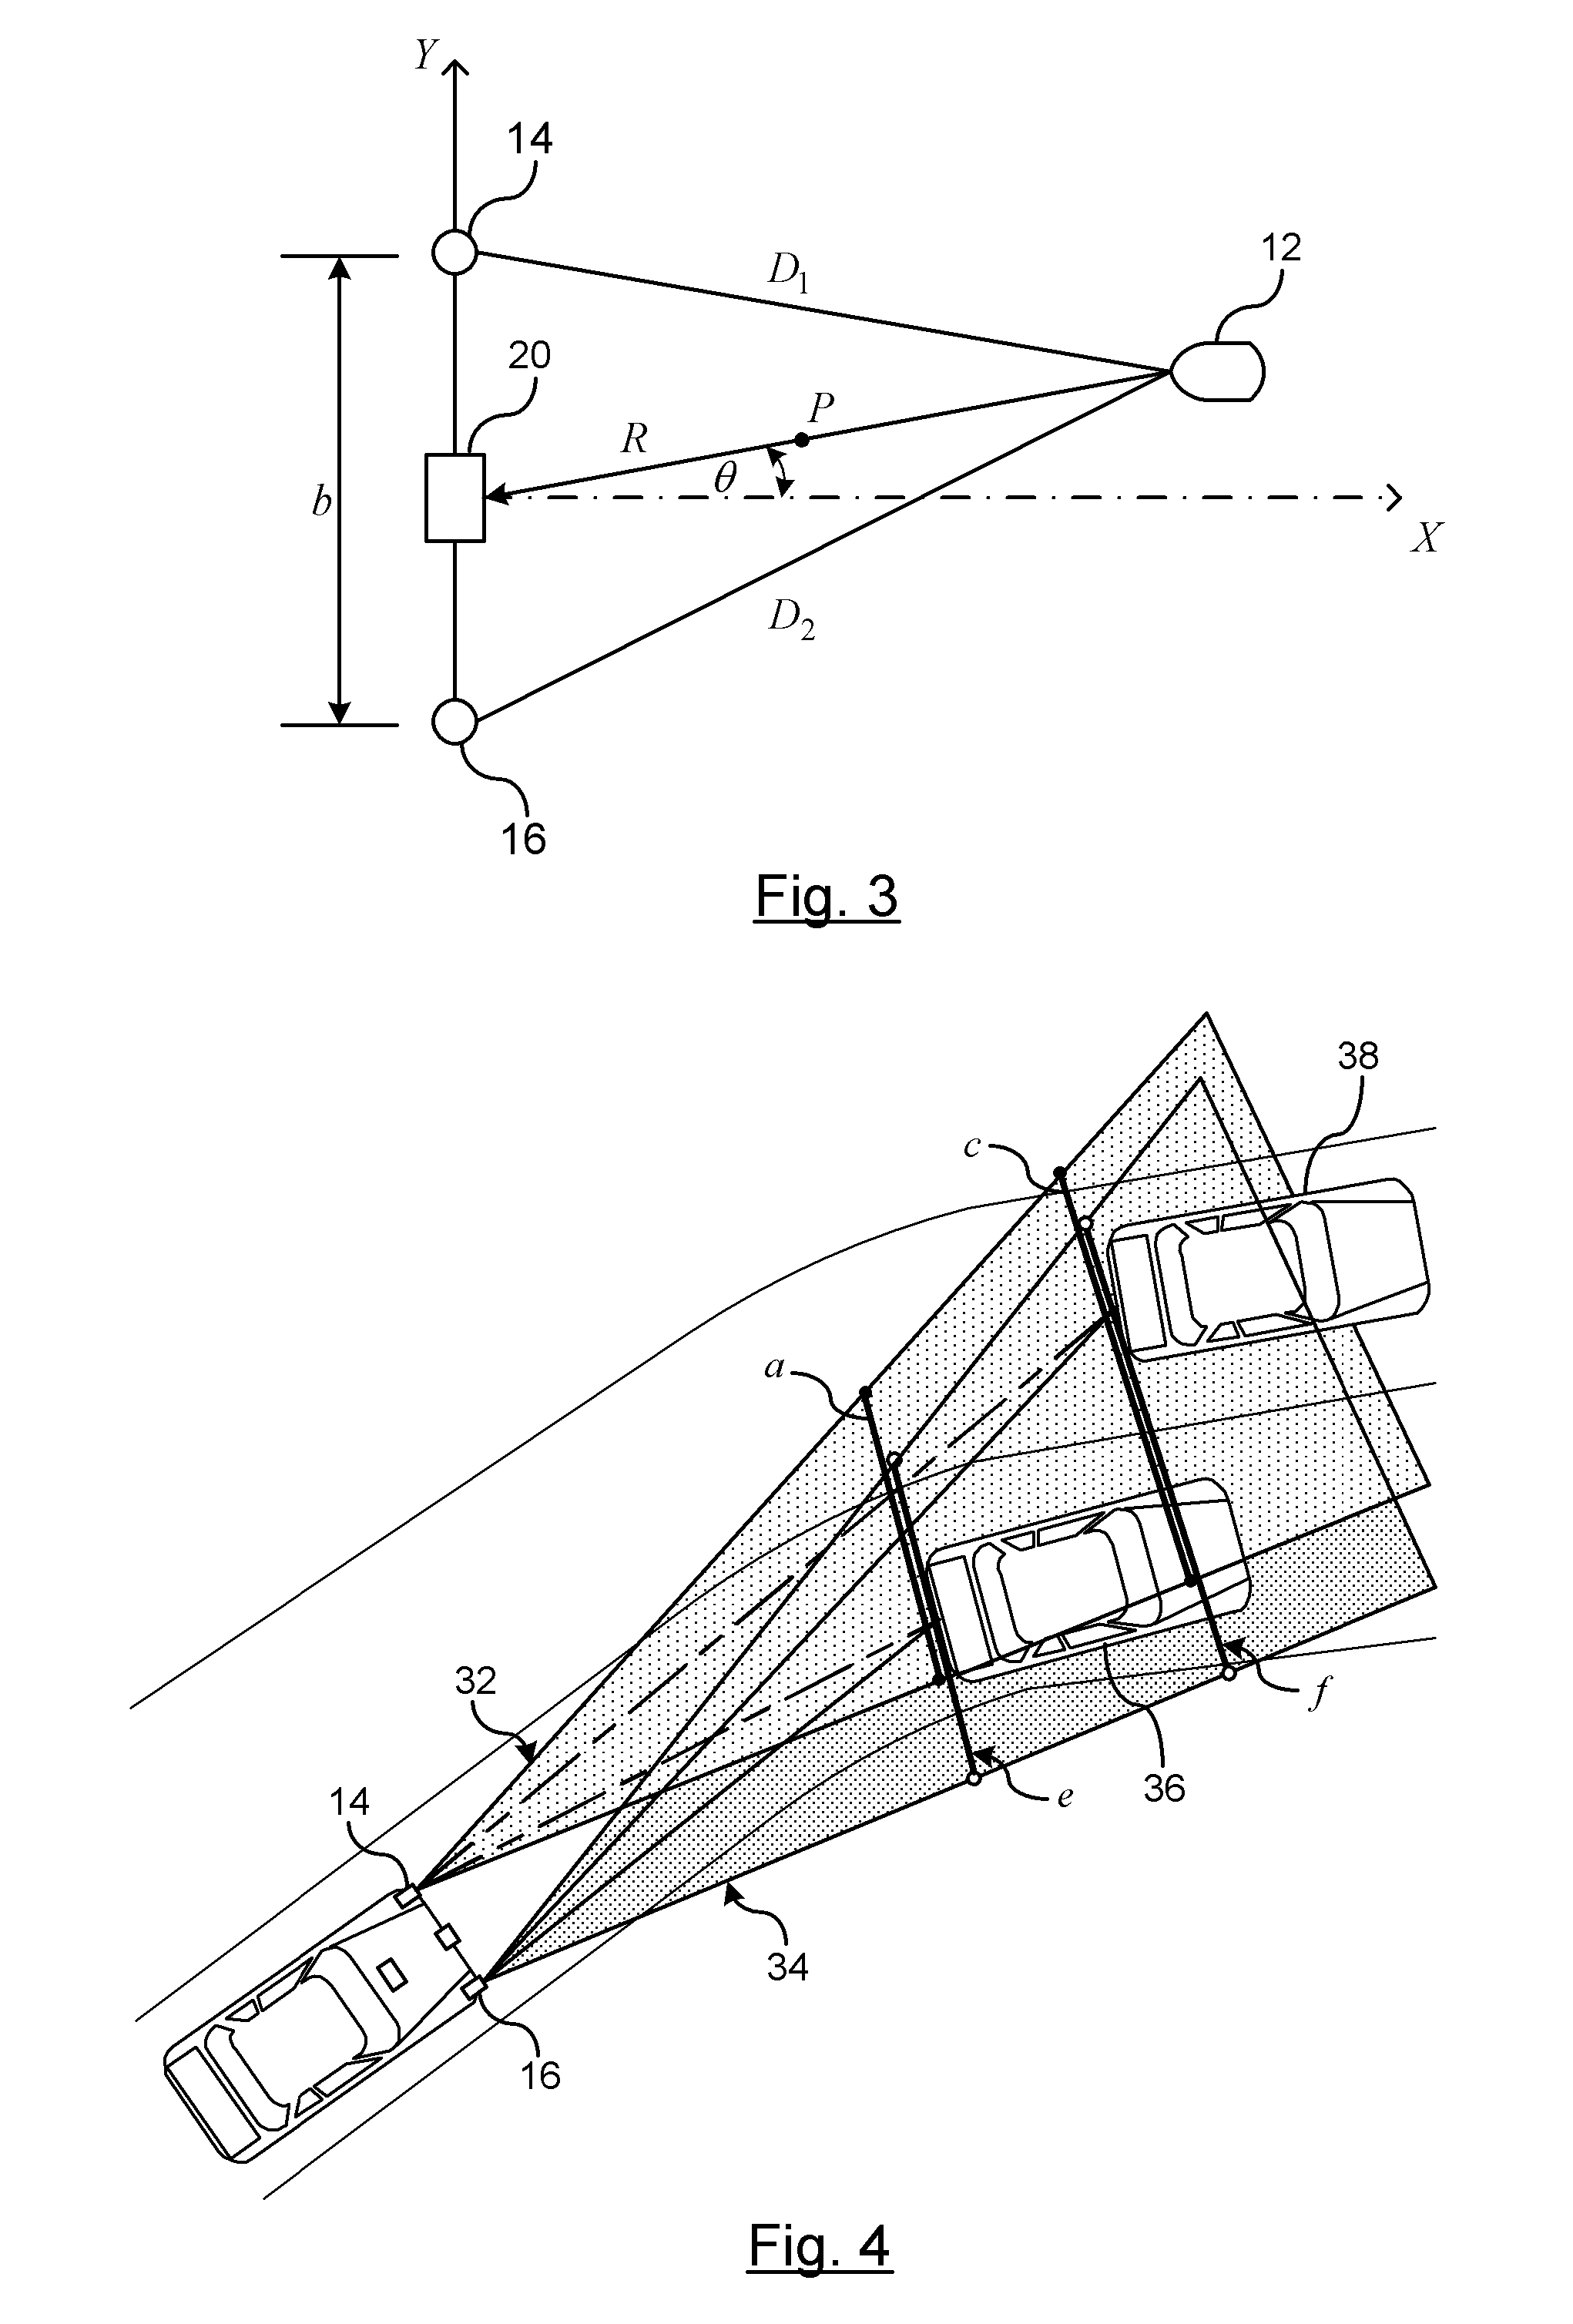 Method and Apparatus for an Object Detection System Using Two Modulated Light Sources